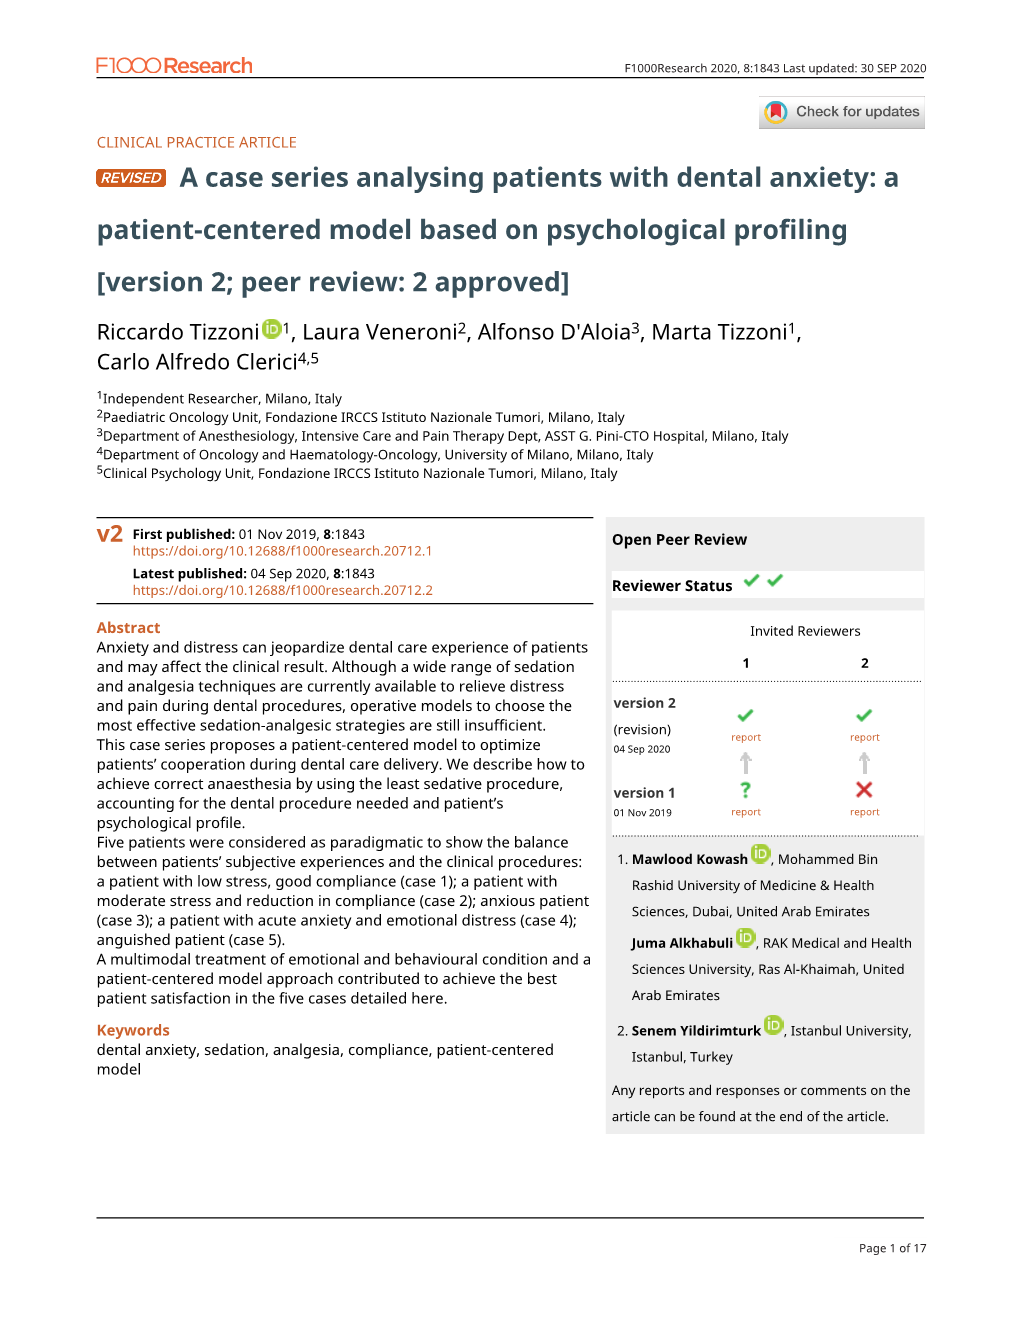 A Case Series Analysing Patients with Dental Anxiety: a Patient-Centered Model Based on Psychological Profiling [Version 2; Peer Review: 2 Approved]